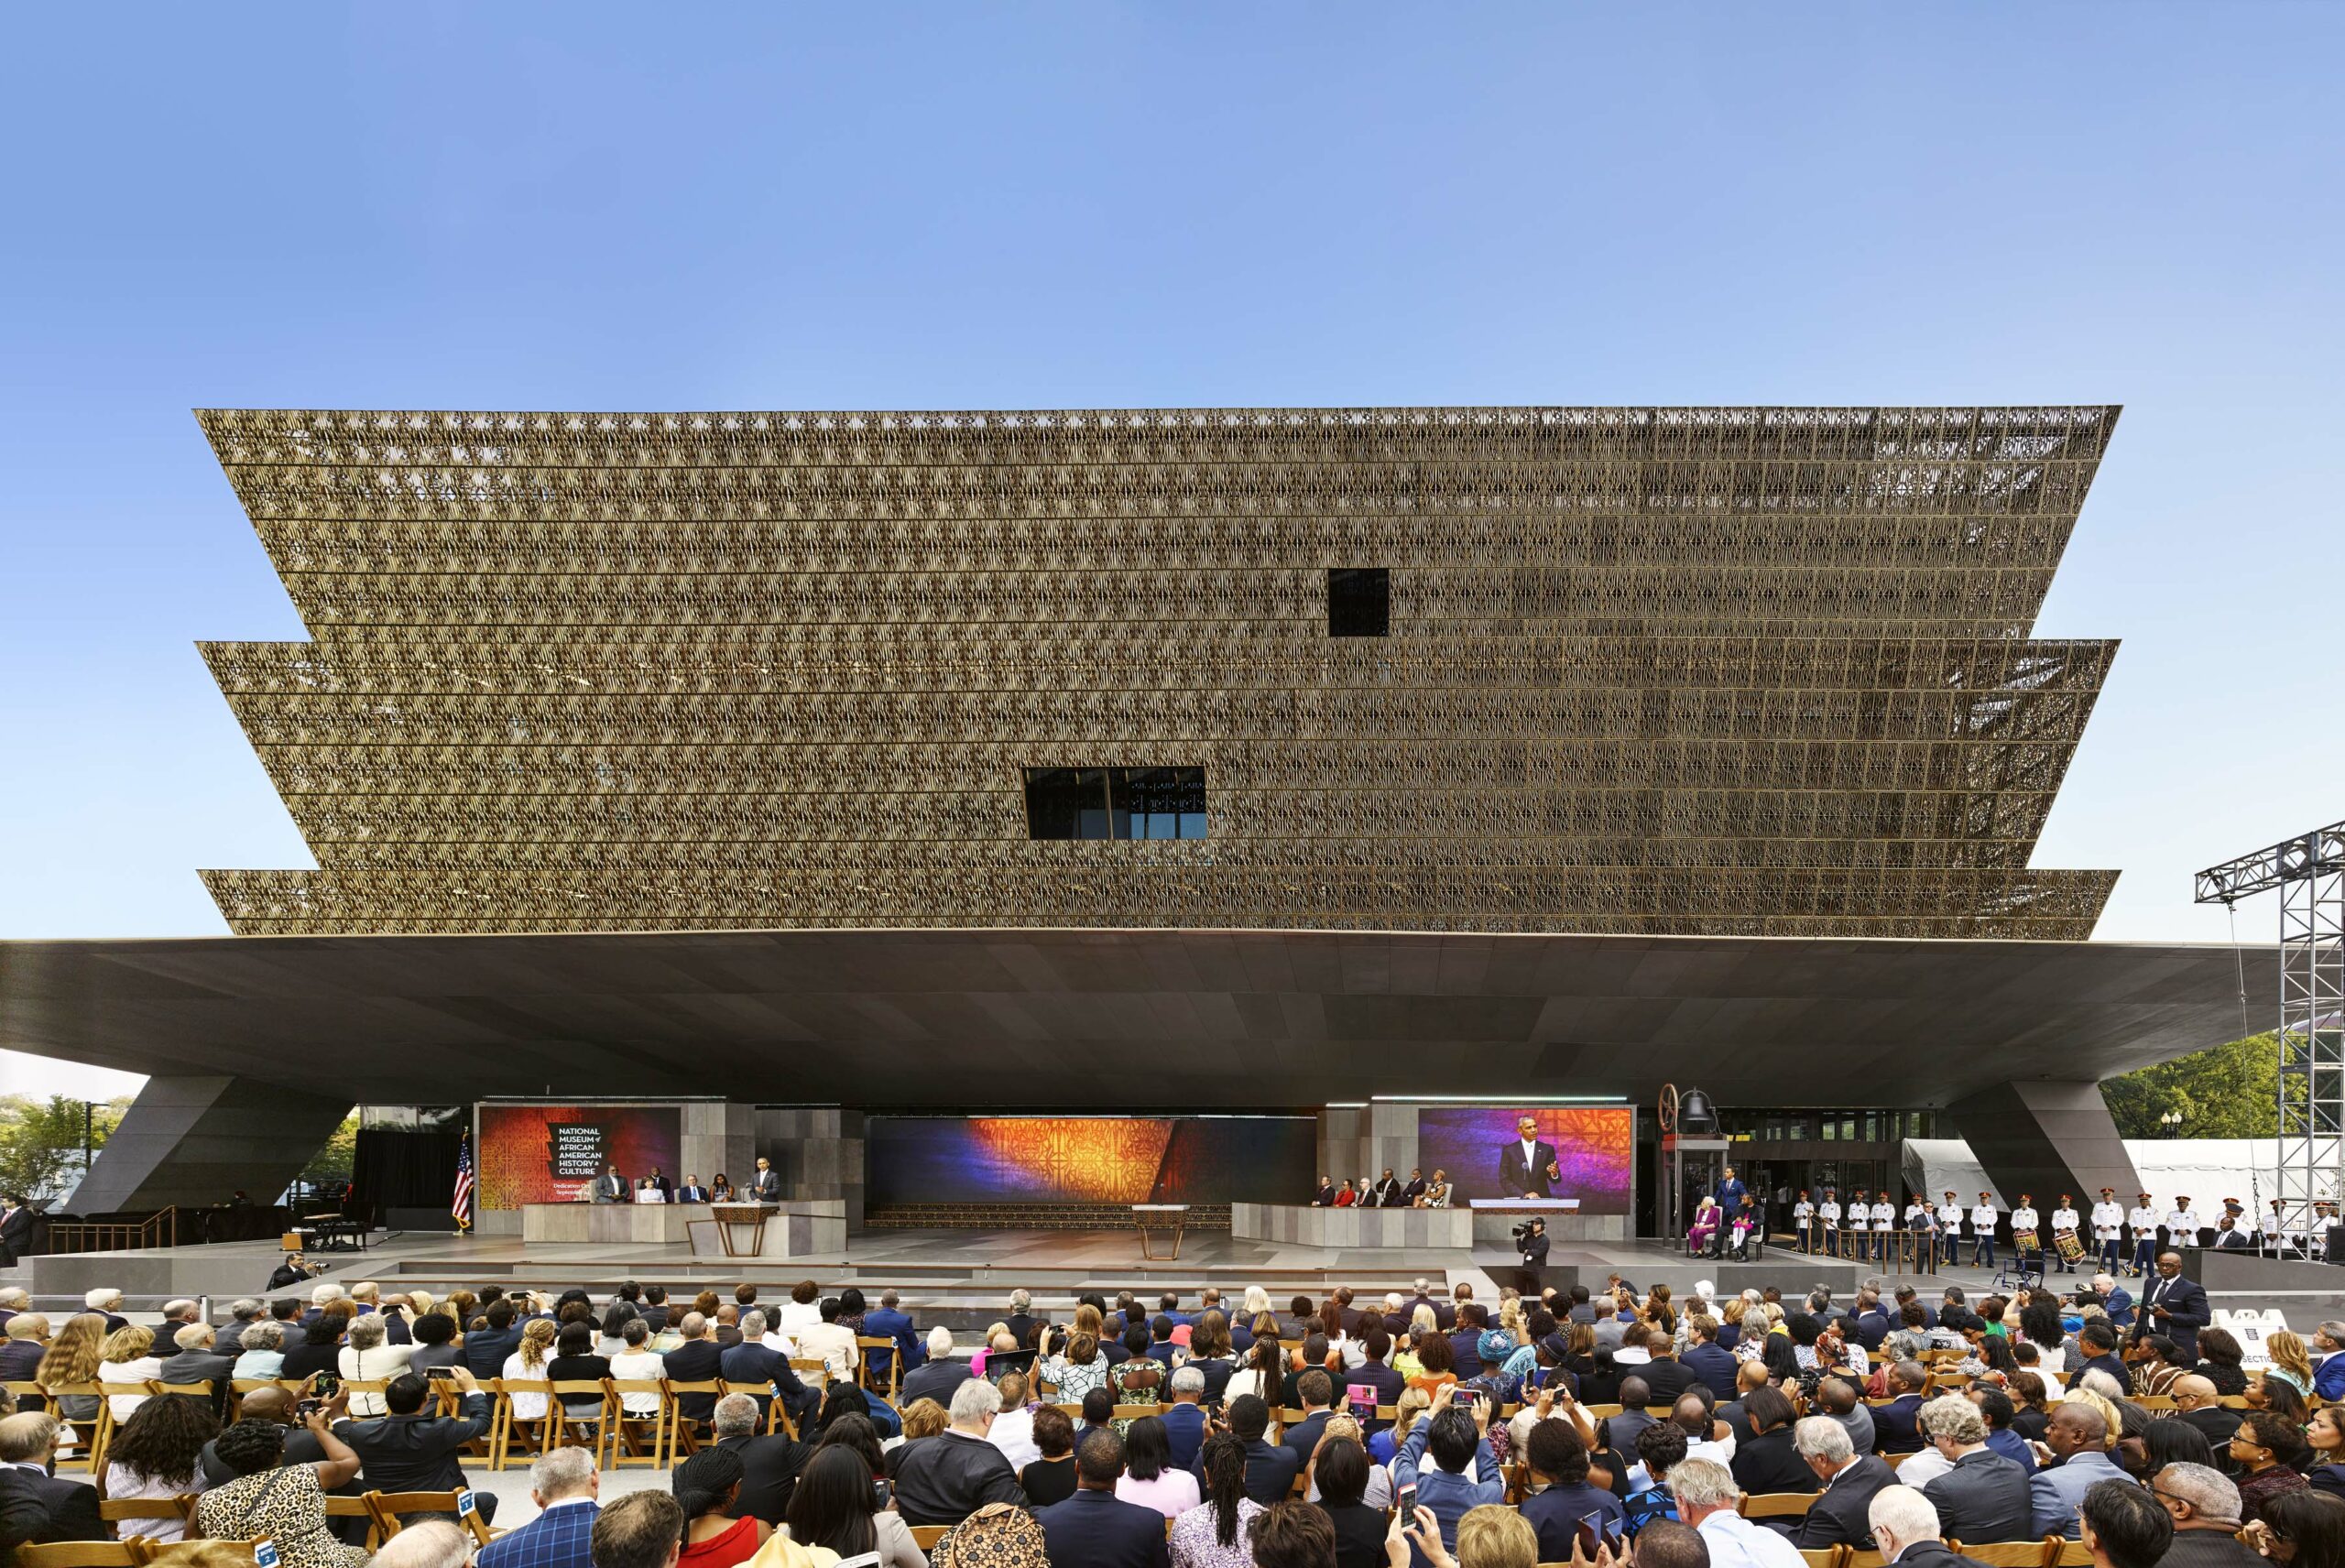 President Barack Obama Speaking At The Opening Of The National Museum Of African American History And Culture Artnet News Scaled 